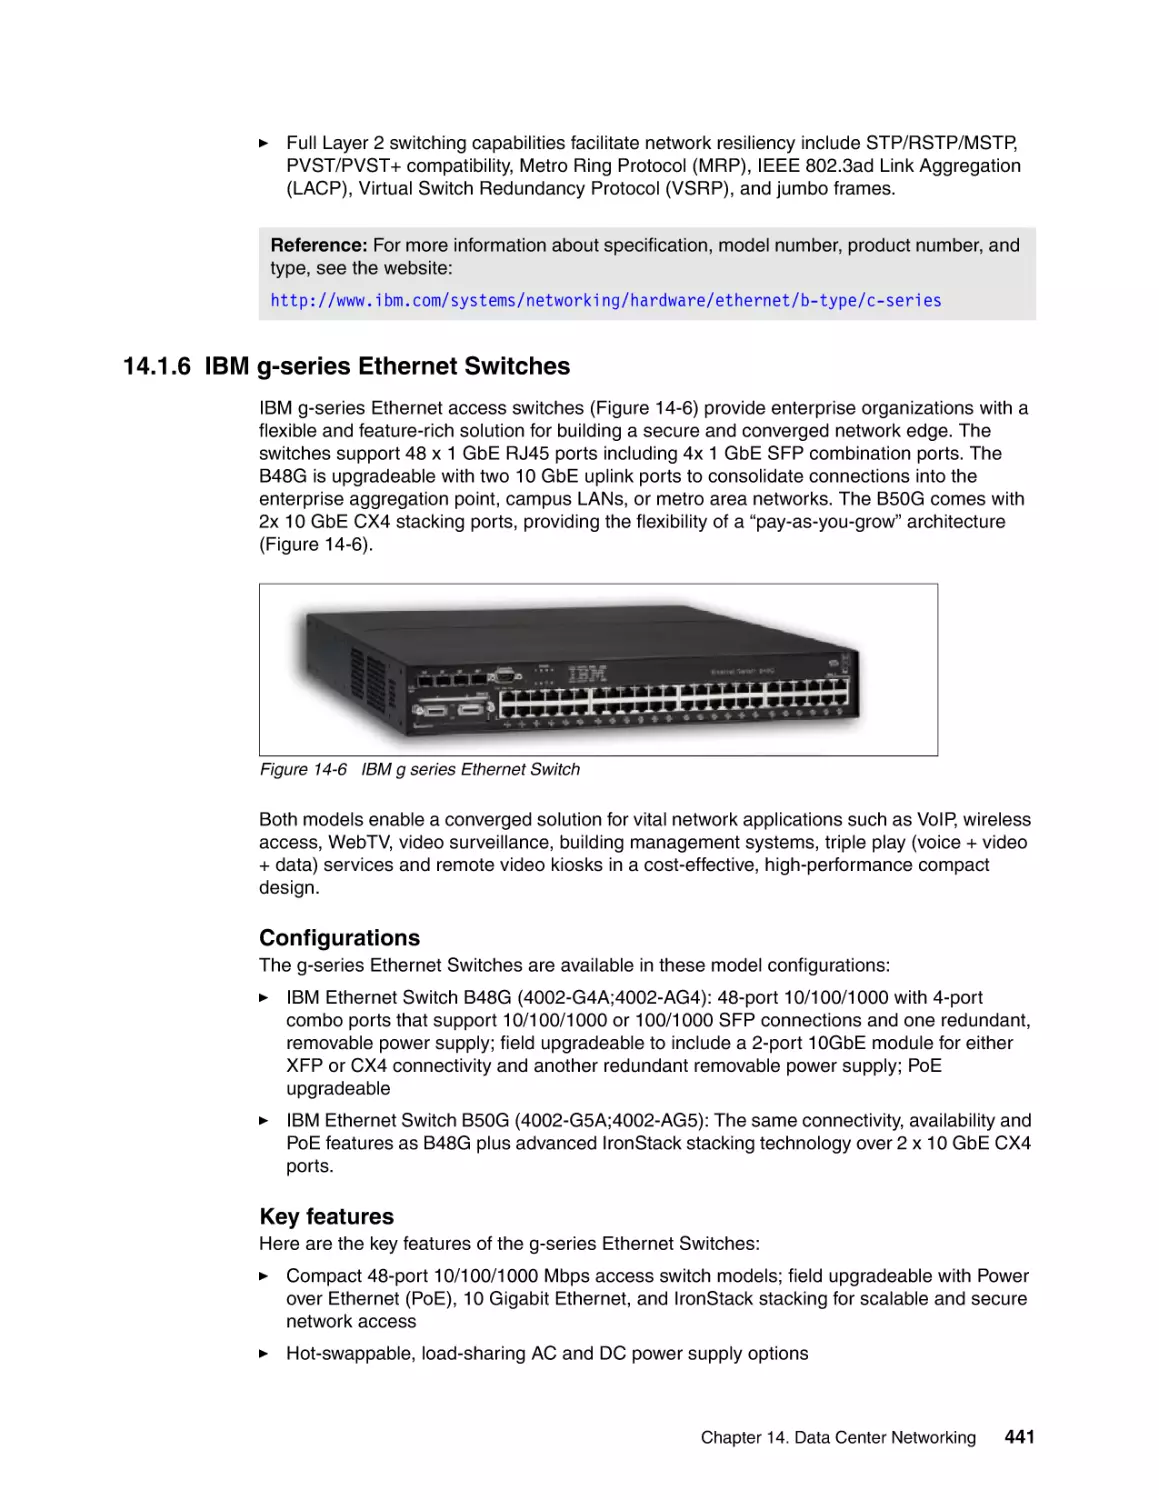 14.1.6 IBM g-series Ethernet Switches